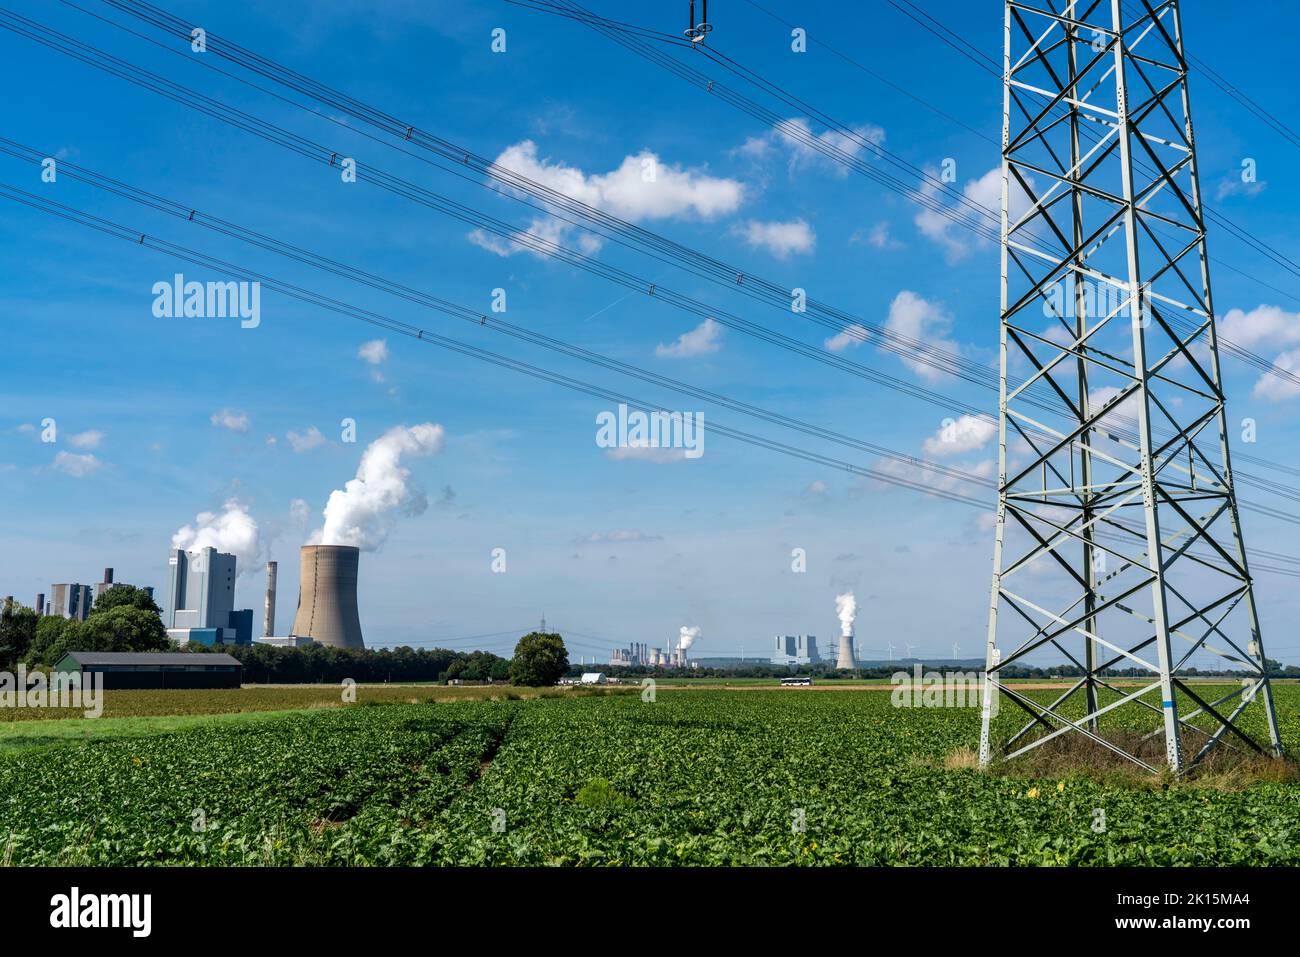 Lignite-fired power plant, RWE Power AG Niederaussem power plant and Neurath power plant at the rear, 2 units shut down in 2020/21 and restarted in Ju Stock Photo